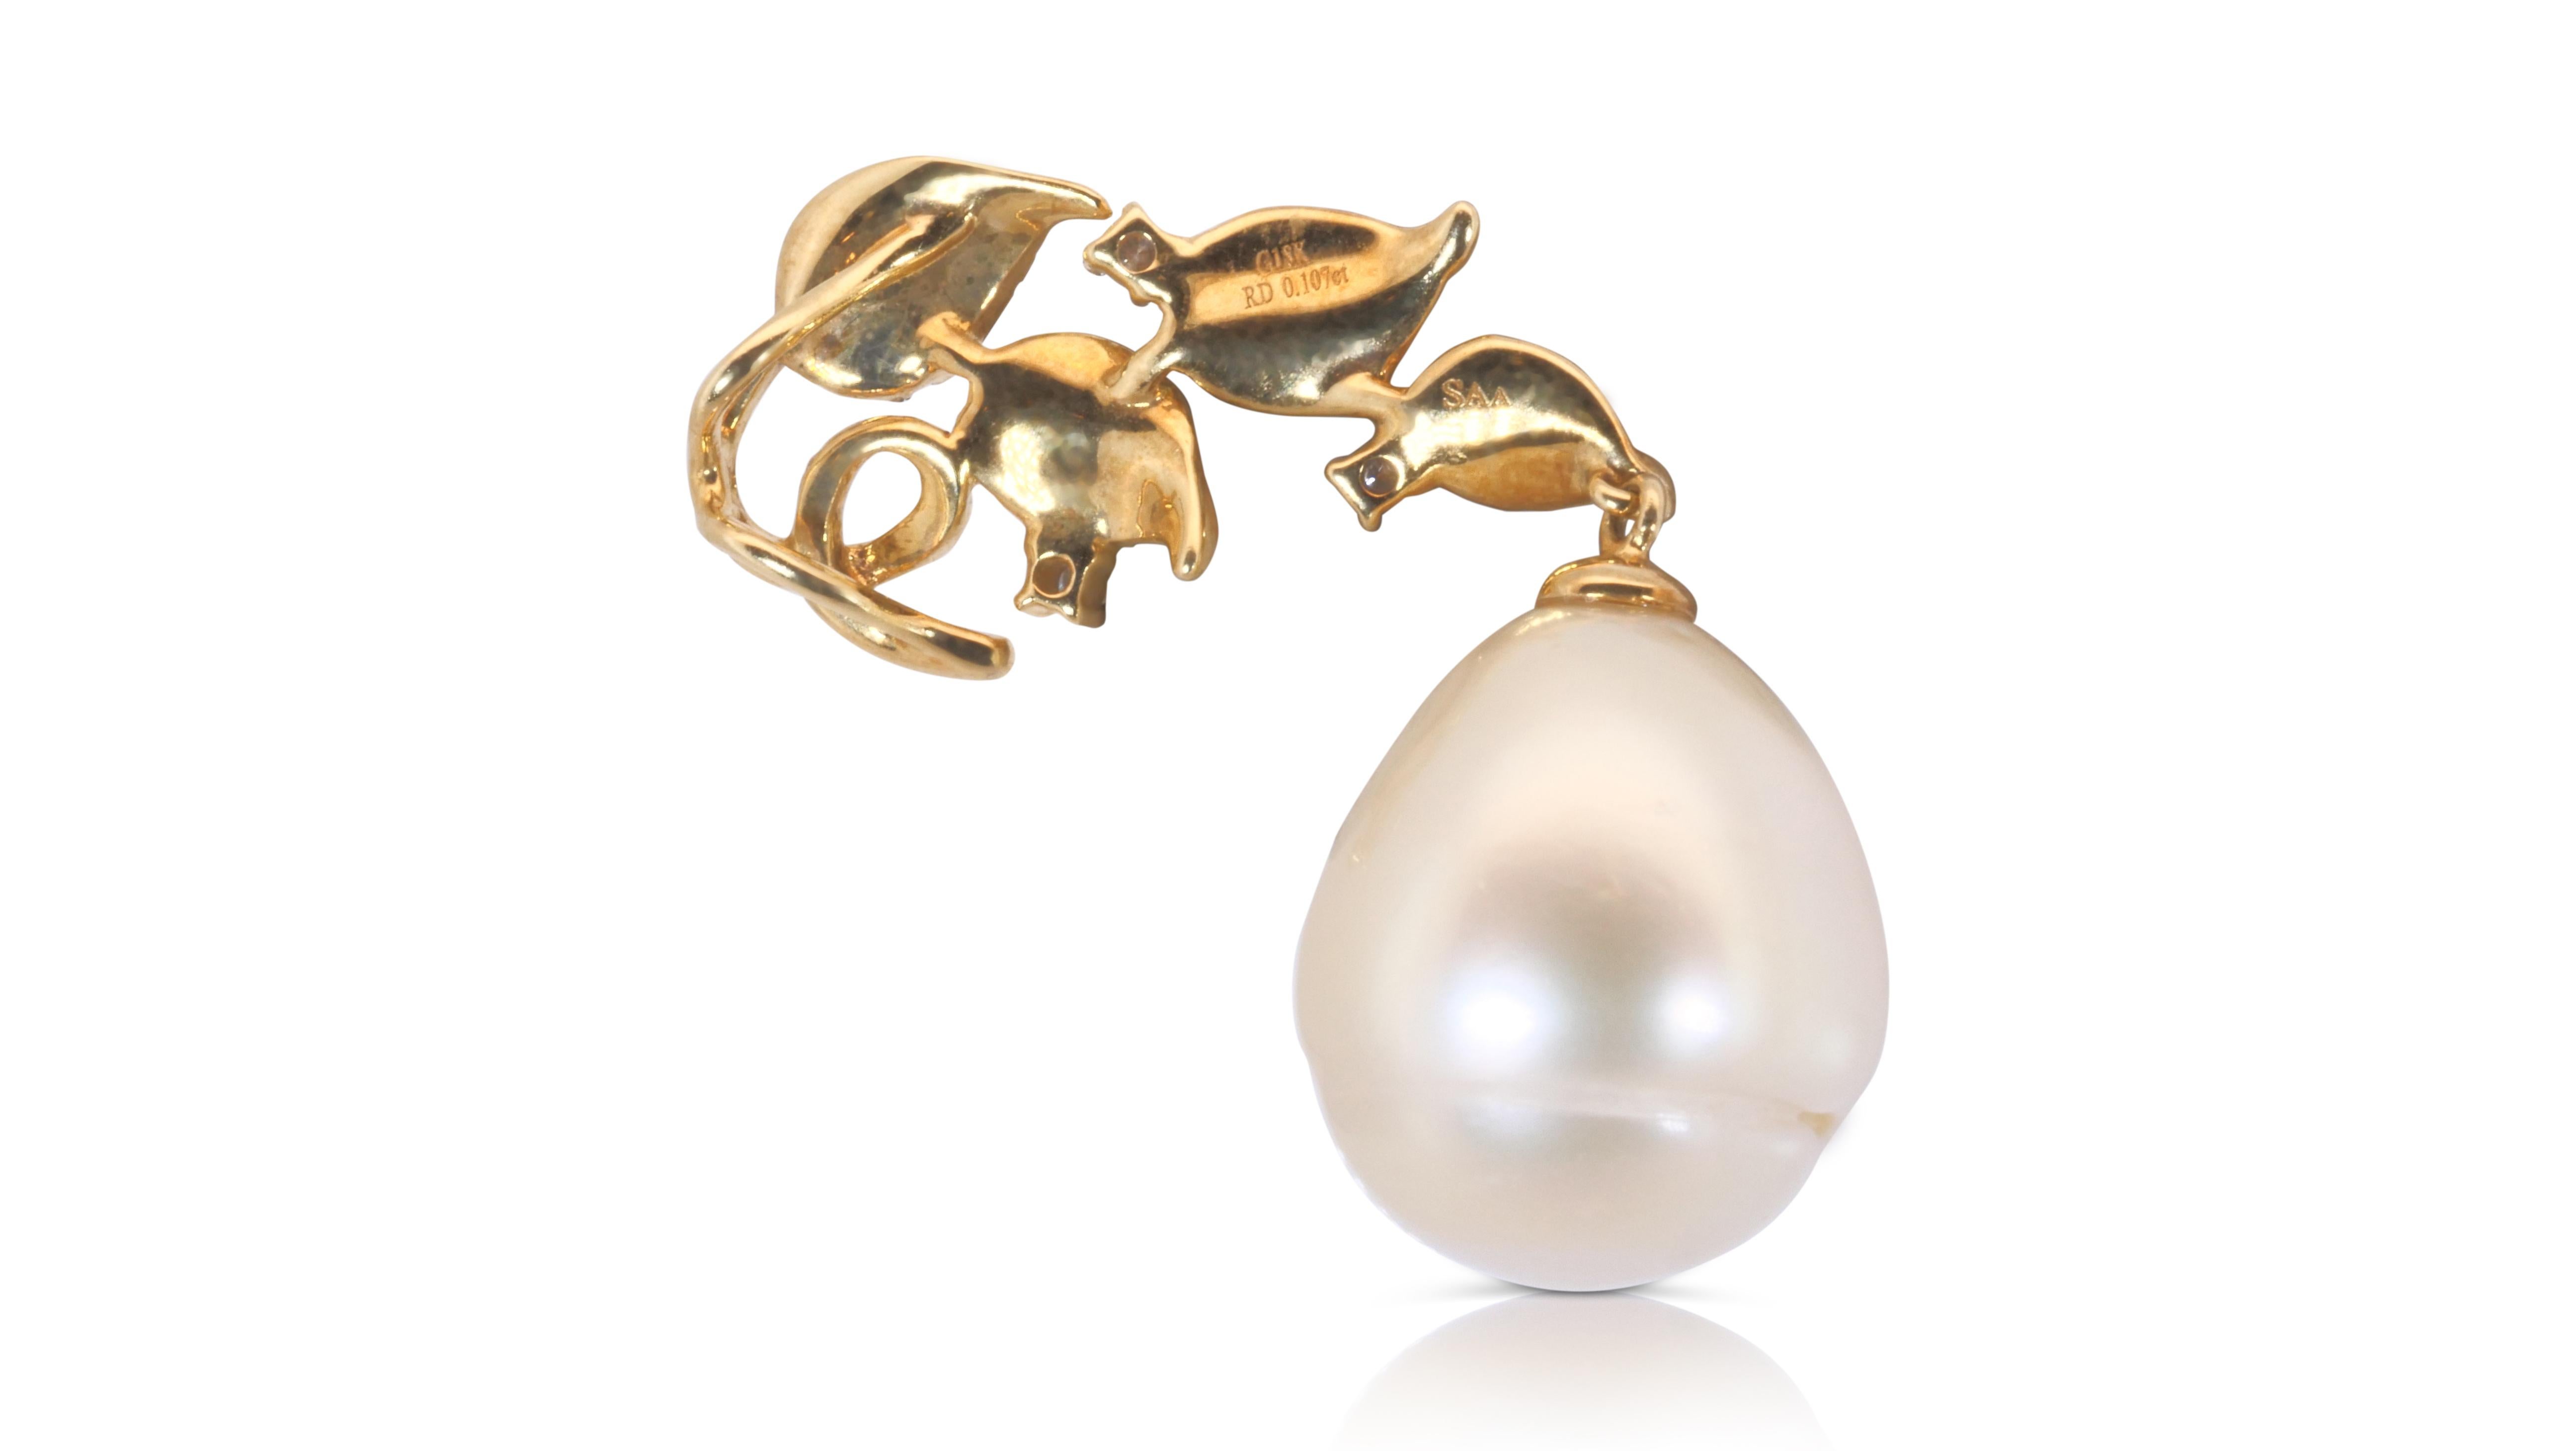 Splendid 18k Yellow Gold Pendant w/0.1 Carat Pearl & Diamonds-Chain not included For Sale 4